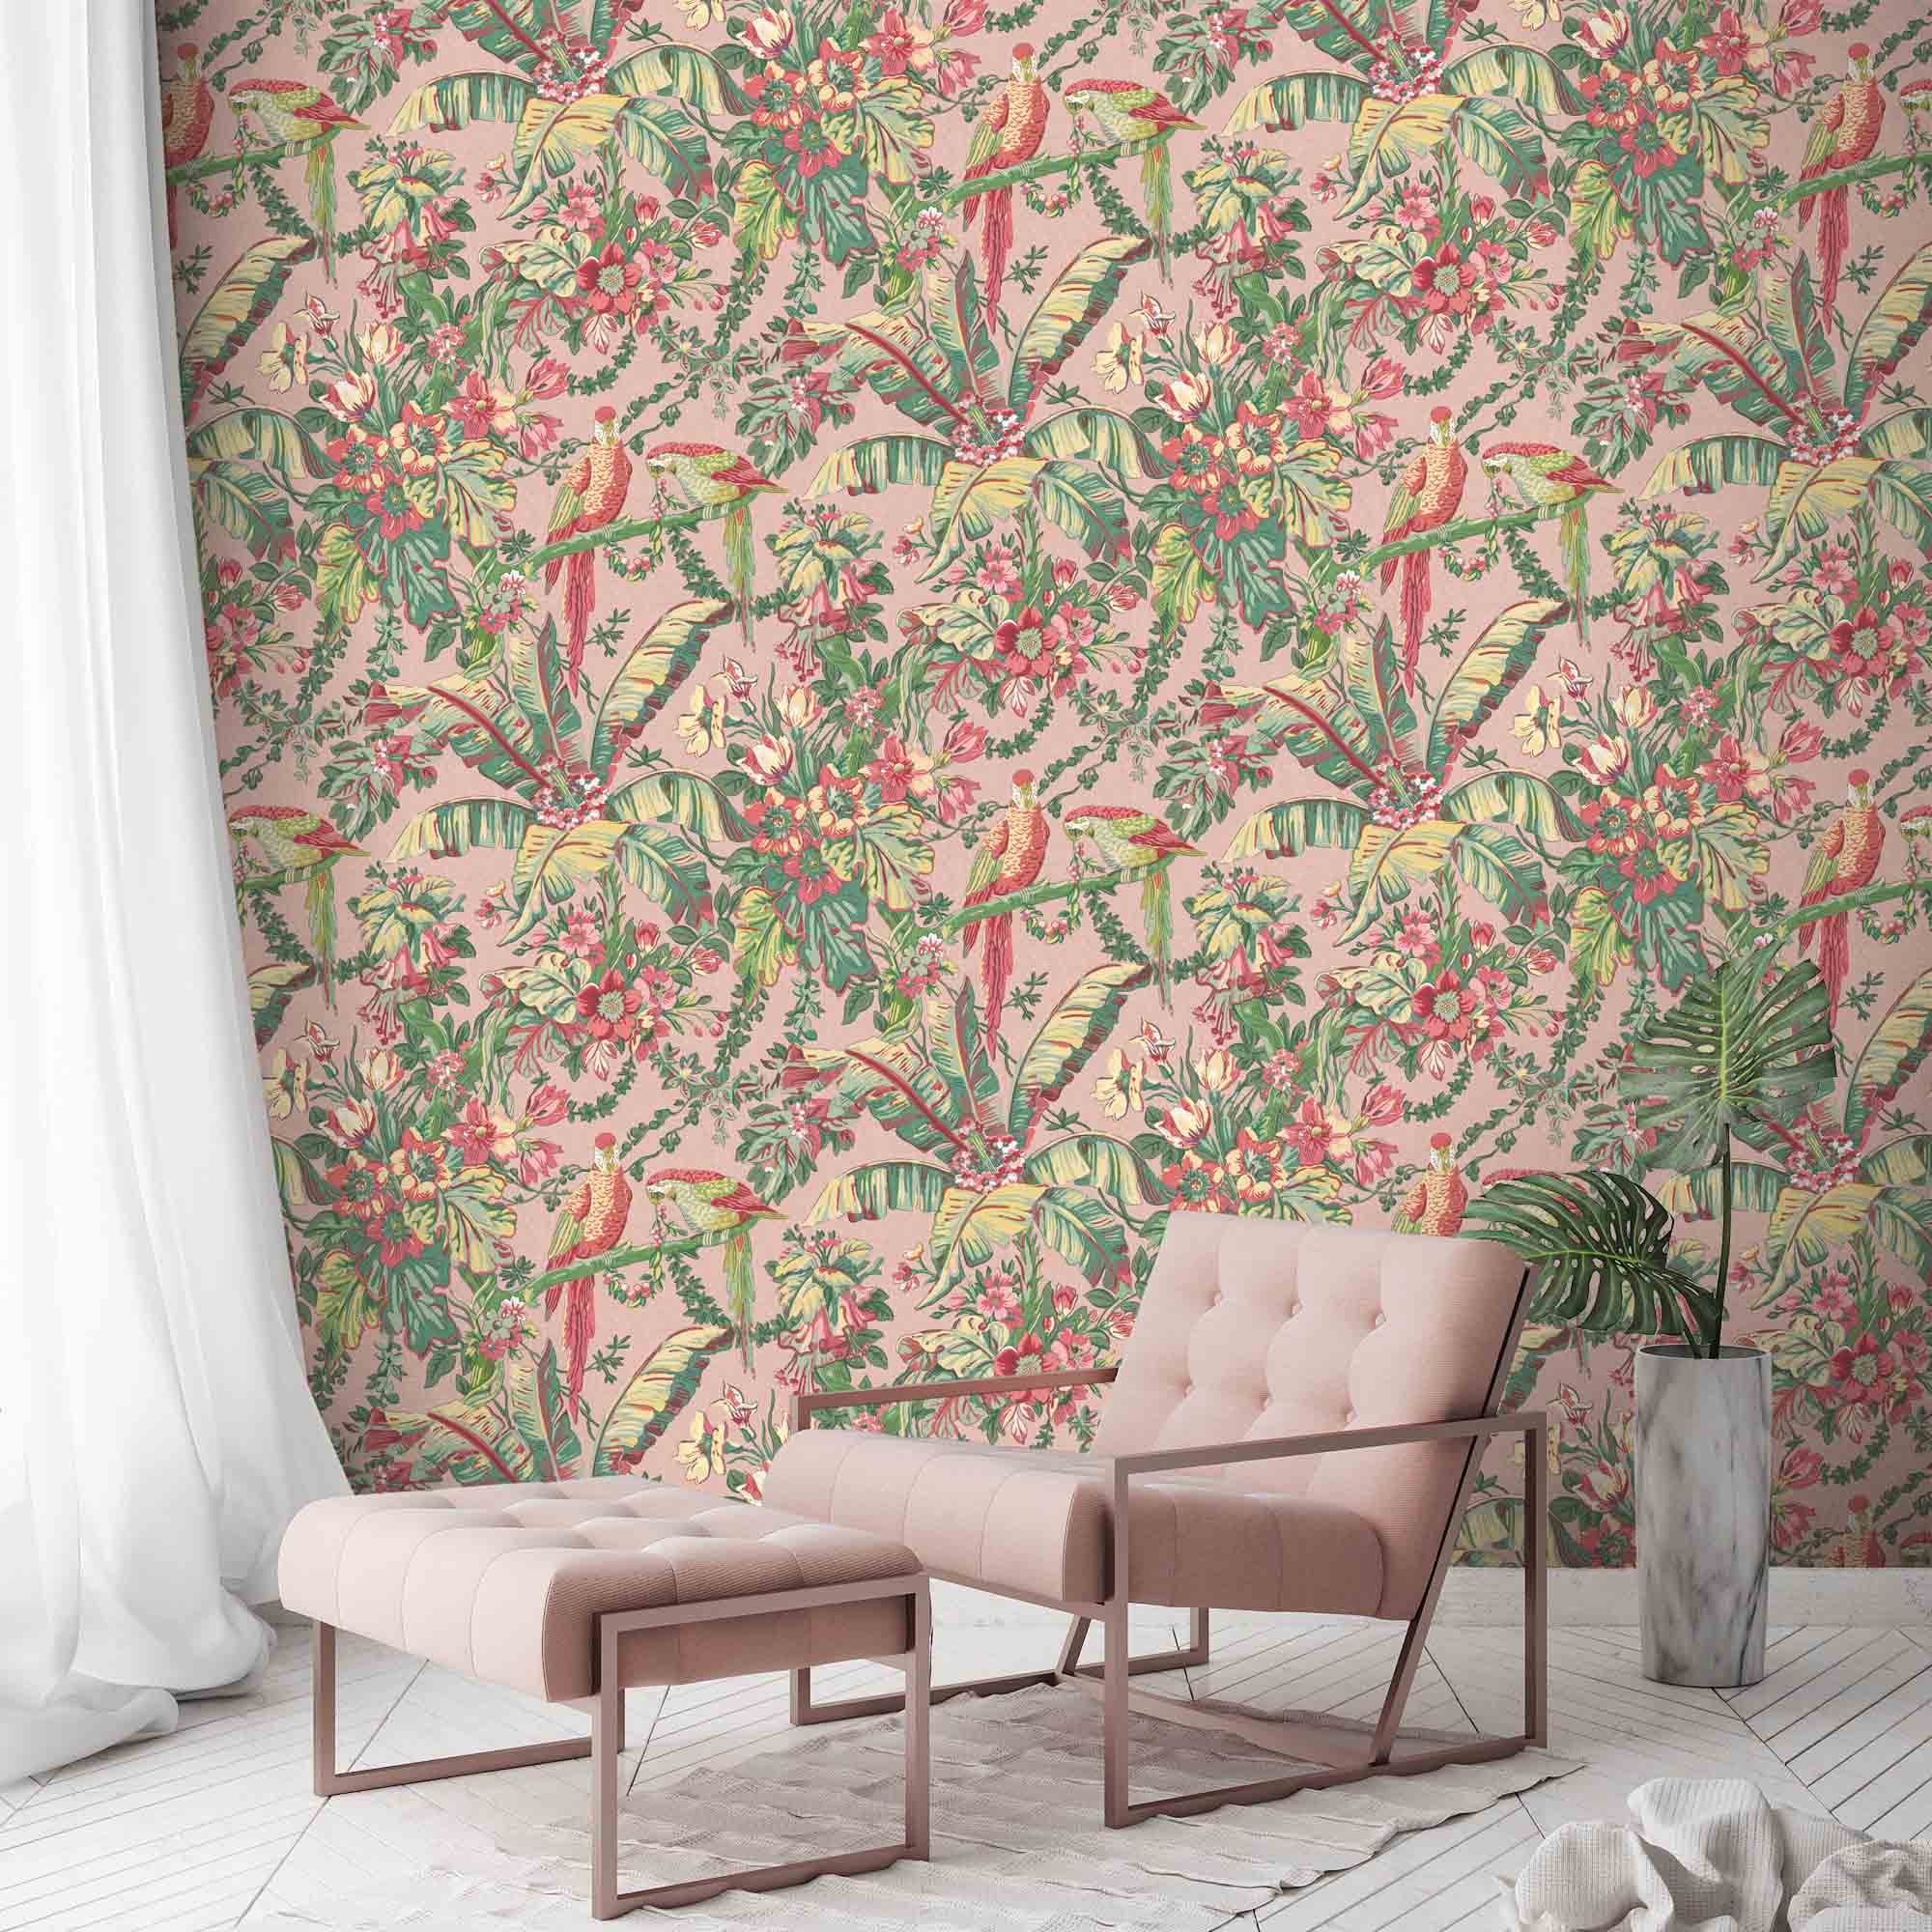 Parrot Talk Sunset Pink By Woodchip & Magnolia